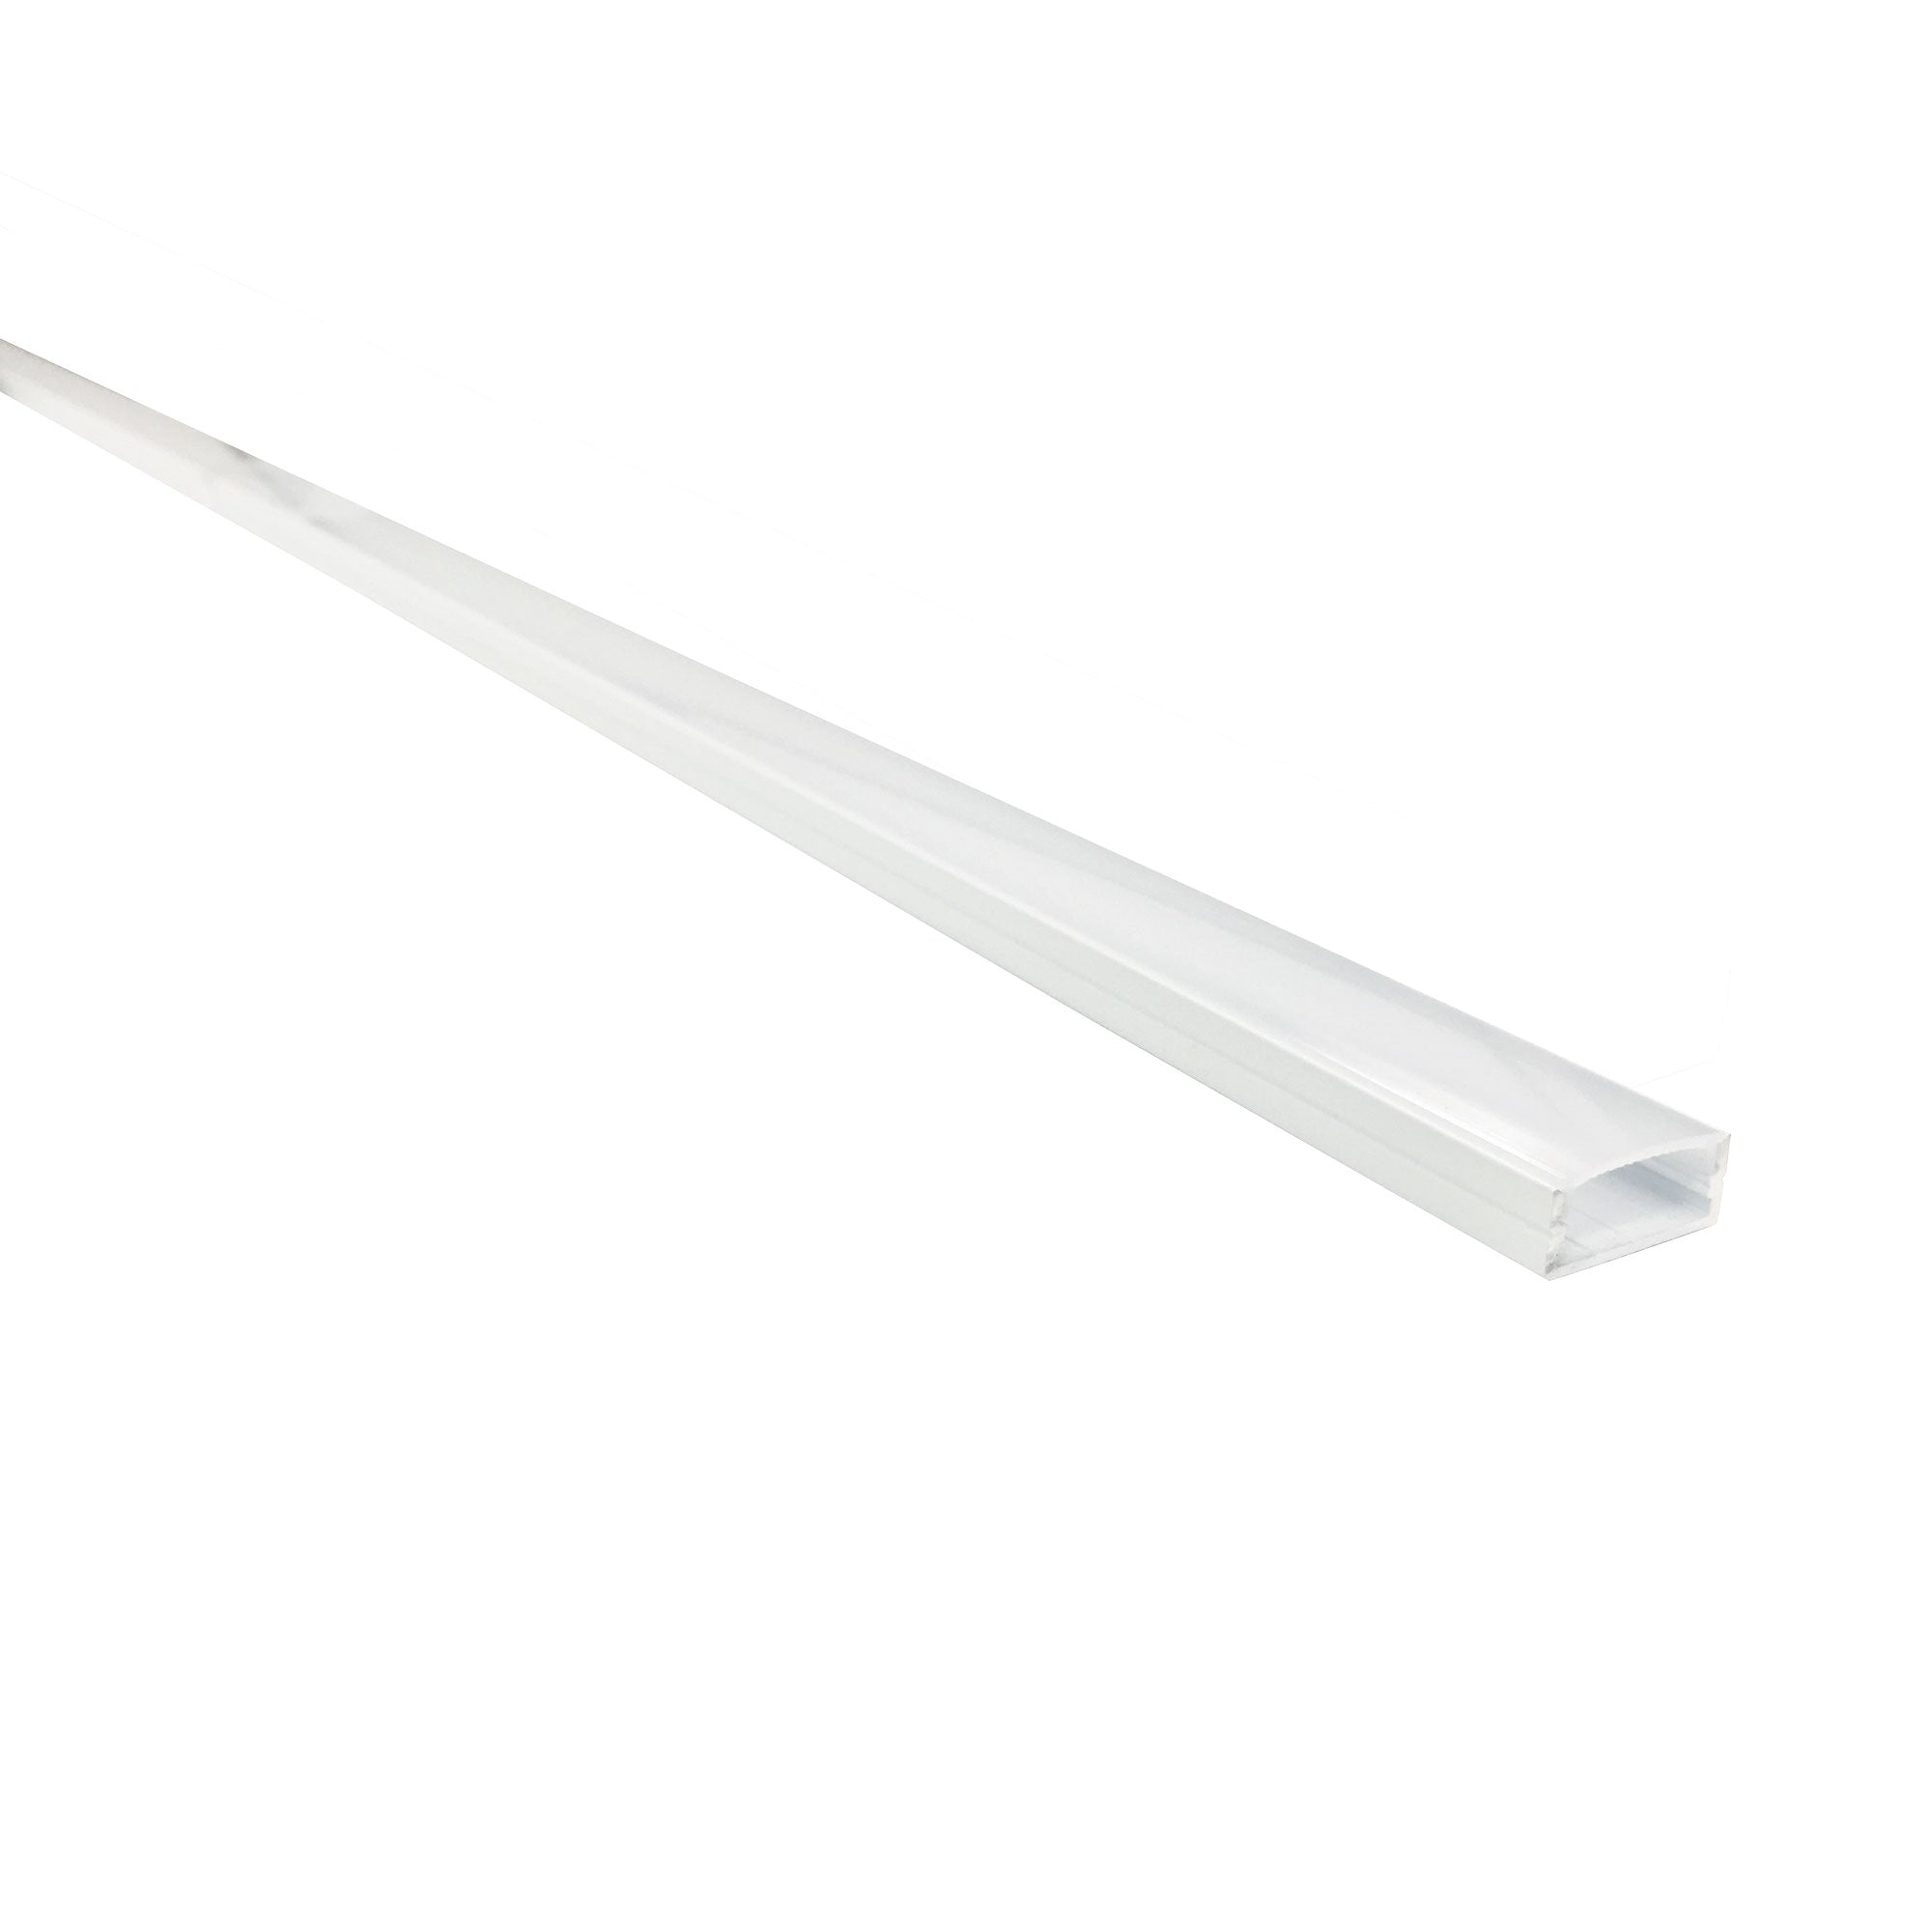 Nora Lighting NATL-C24W 4-ft Shallow Channel (Plastic Diffuser and End Caps Included) - White